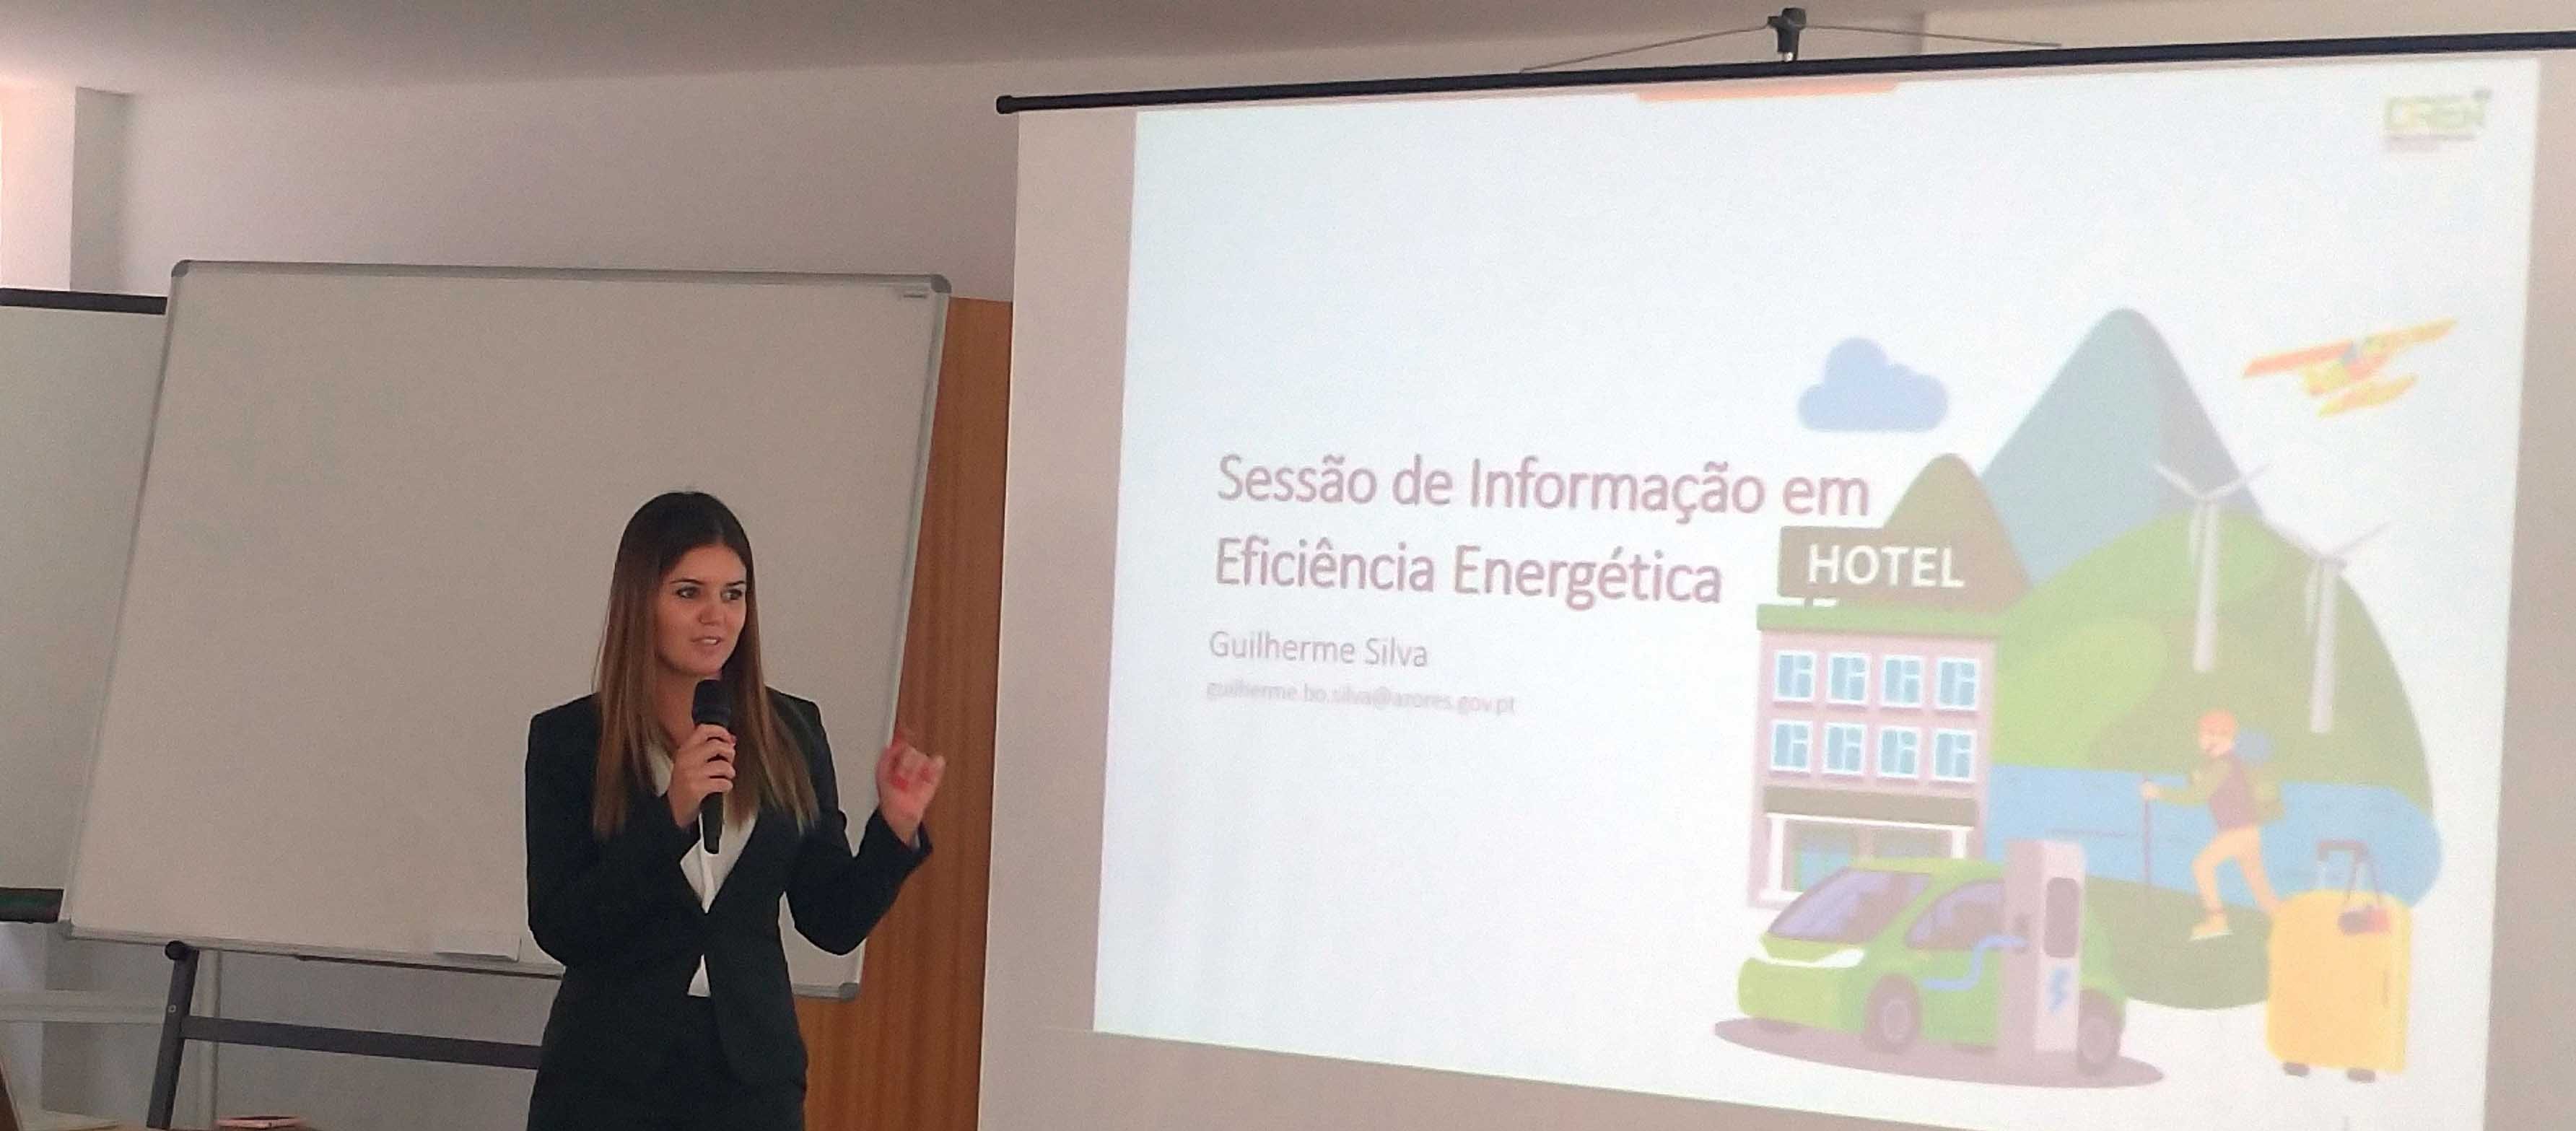 EVs and higher energy performance in Hotels, Azores